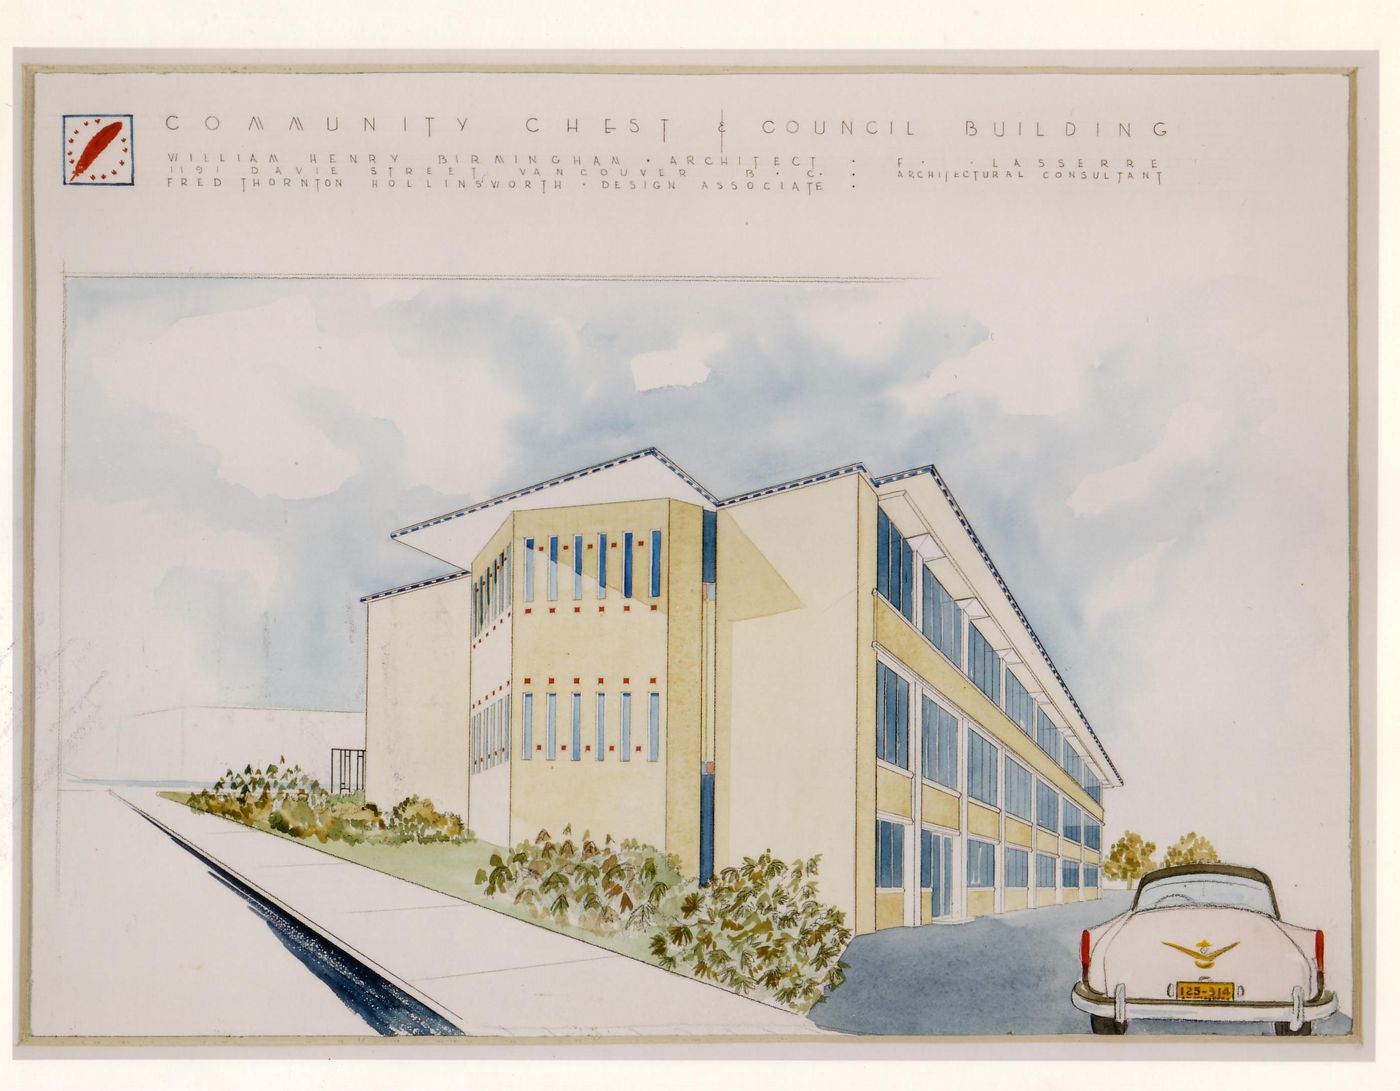 Exterior perspective of entrance facade, Community Chest and Council Building, Vancouver, British Columbia